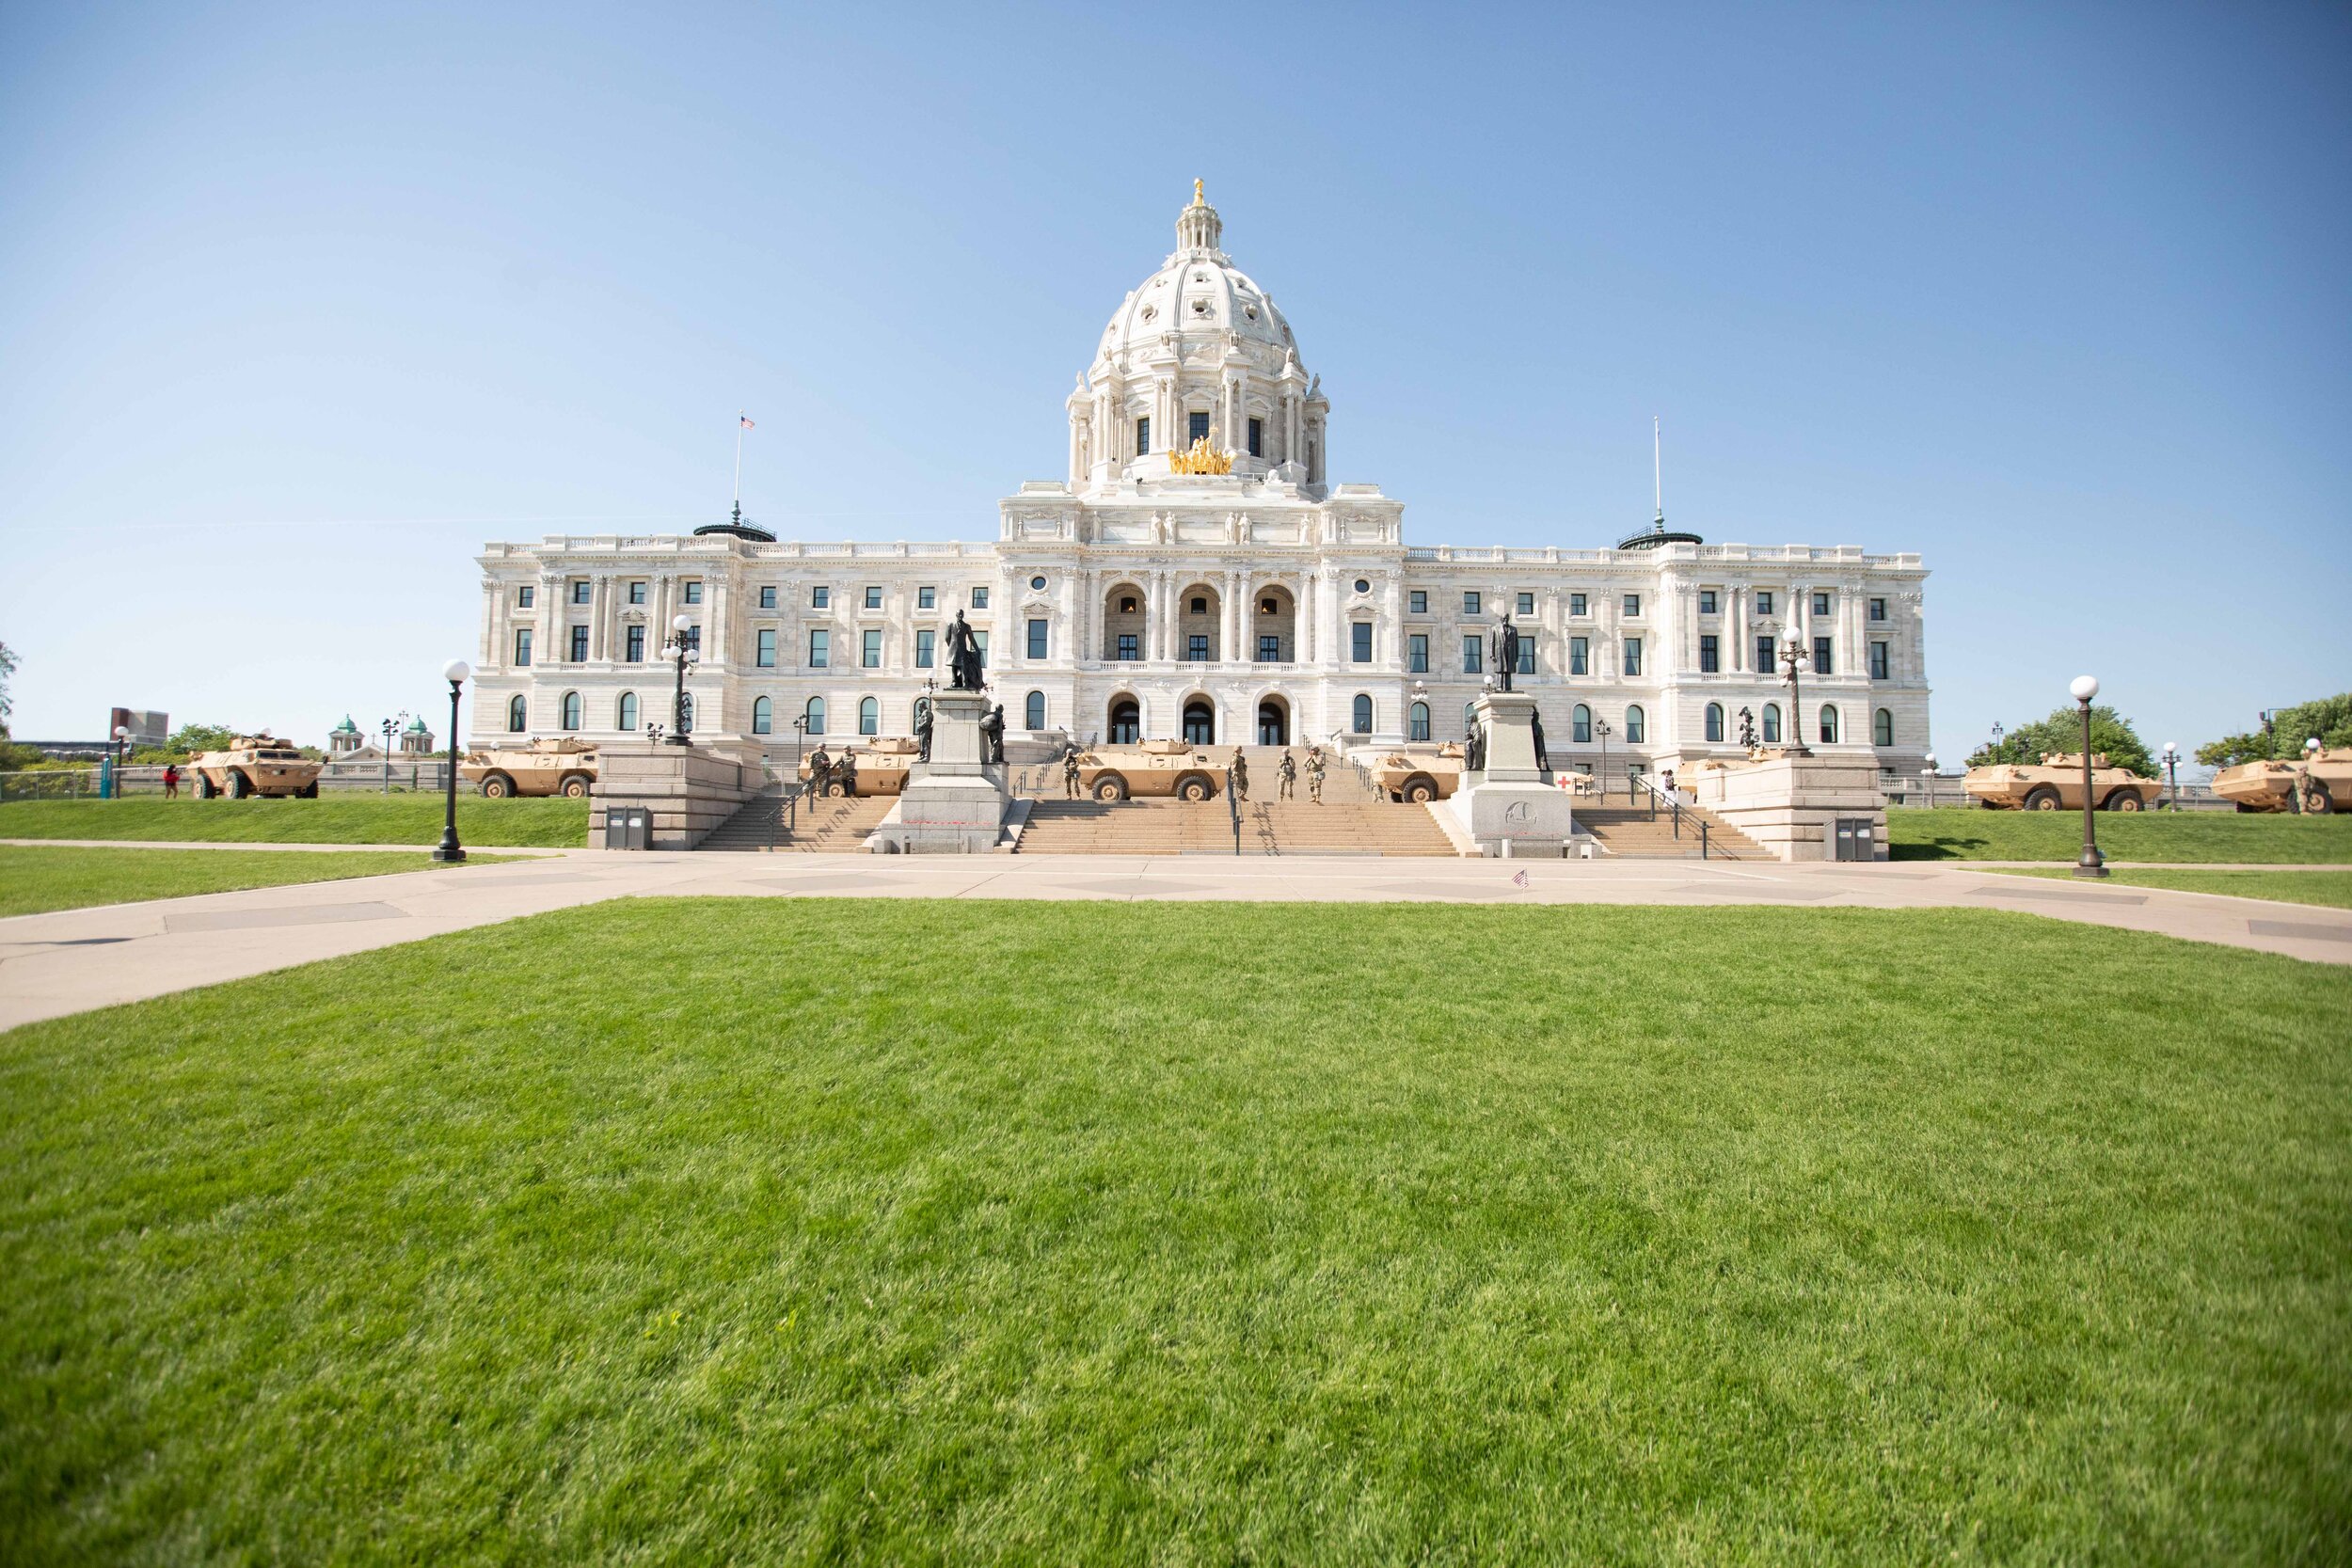  The lawn of the Minnesota State Capitol sits empty as the National Guard set up armored vehicles and soldiers on the steps of the Captiol building in Saint Paul, Minnesota on June 1, 2020. Chris Juhn/Zenger 